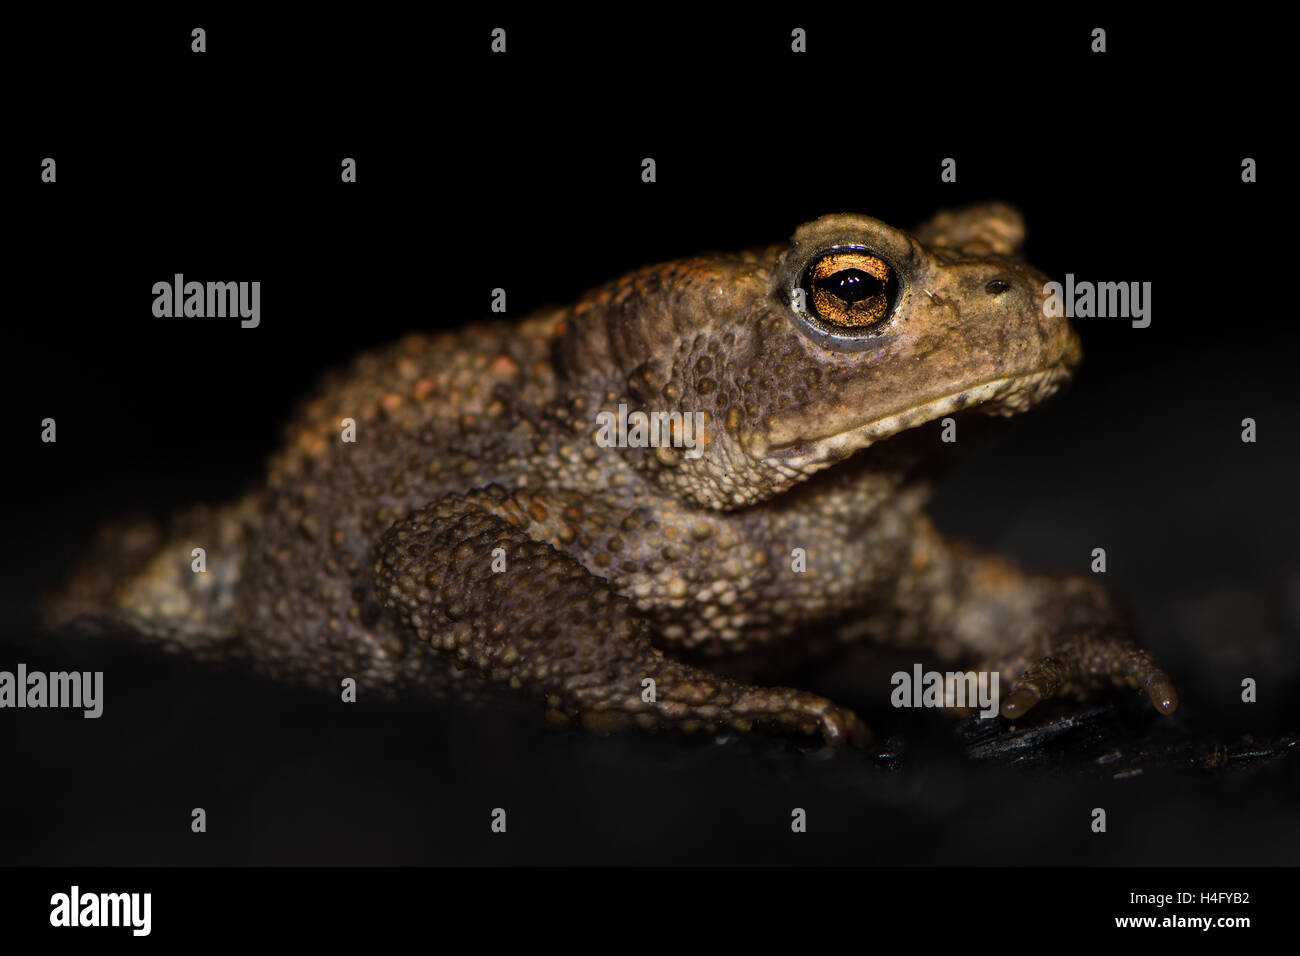 Juvenile common toad (Bufo bufo) against black background. Familiar amphibian at night on burnt wood, with bright eyes visible Stock Photo